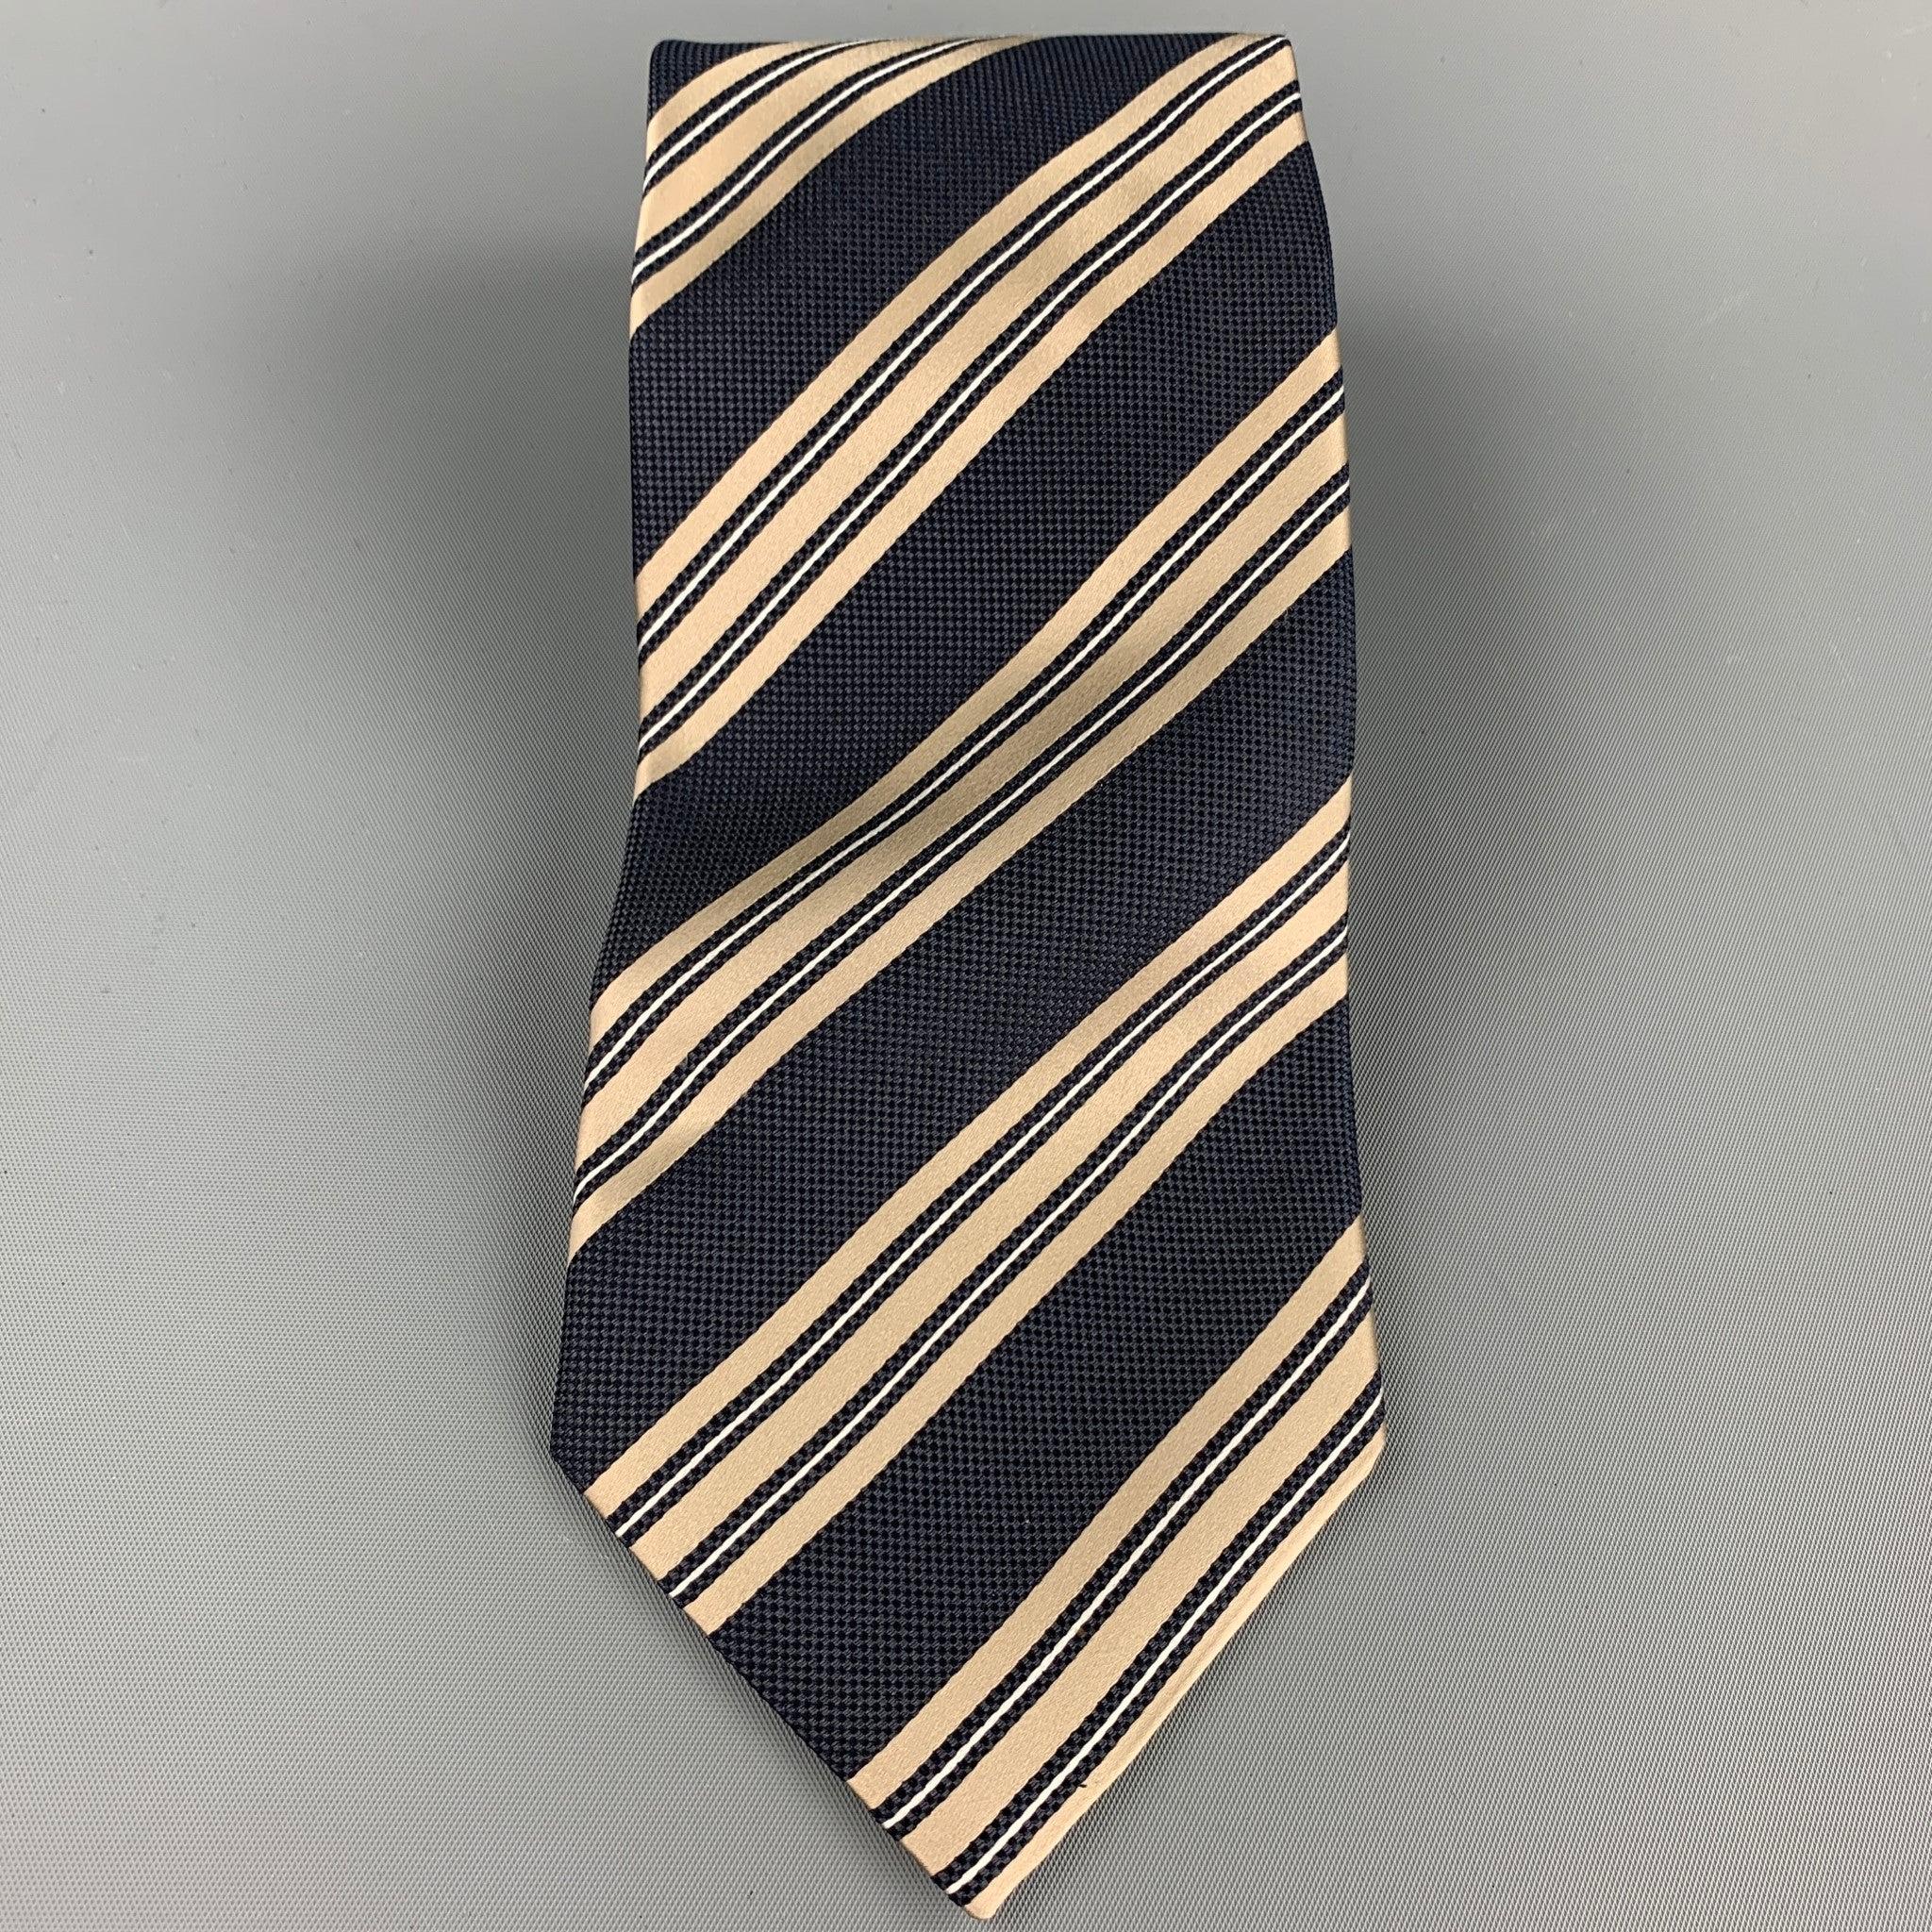 ERMENEGILDO ZEGNA tie comes in a navy & taupe diagonal stripe silk. Made in Italy.Very Good Pre-Owned Condition.Width: 4 inches  
  
  
  
 Sui Generis Reference: 107871
 Category: Tie
 More Details
  
 Brand: ERMENEGILDO ZEGNA
 Color: Navy
 Color